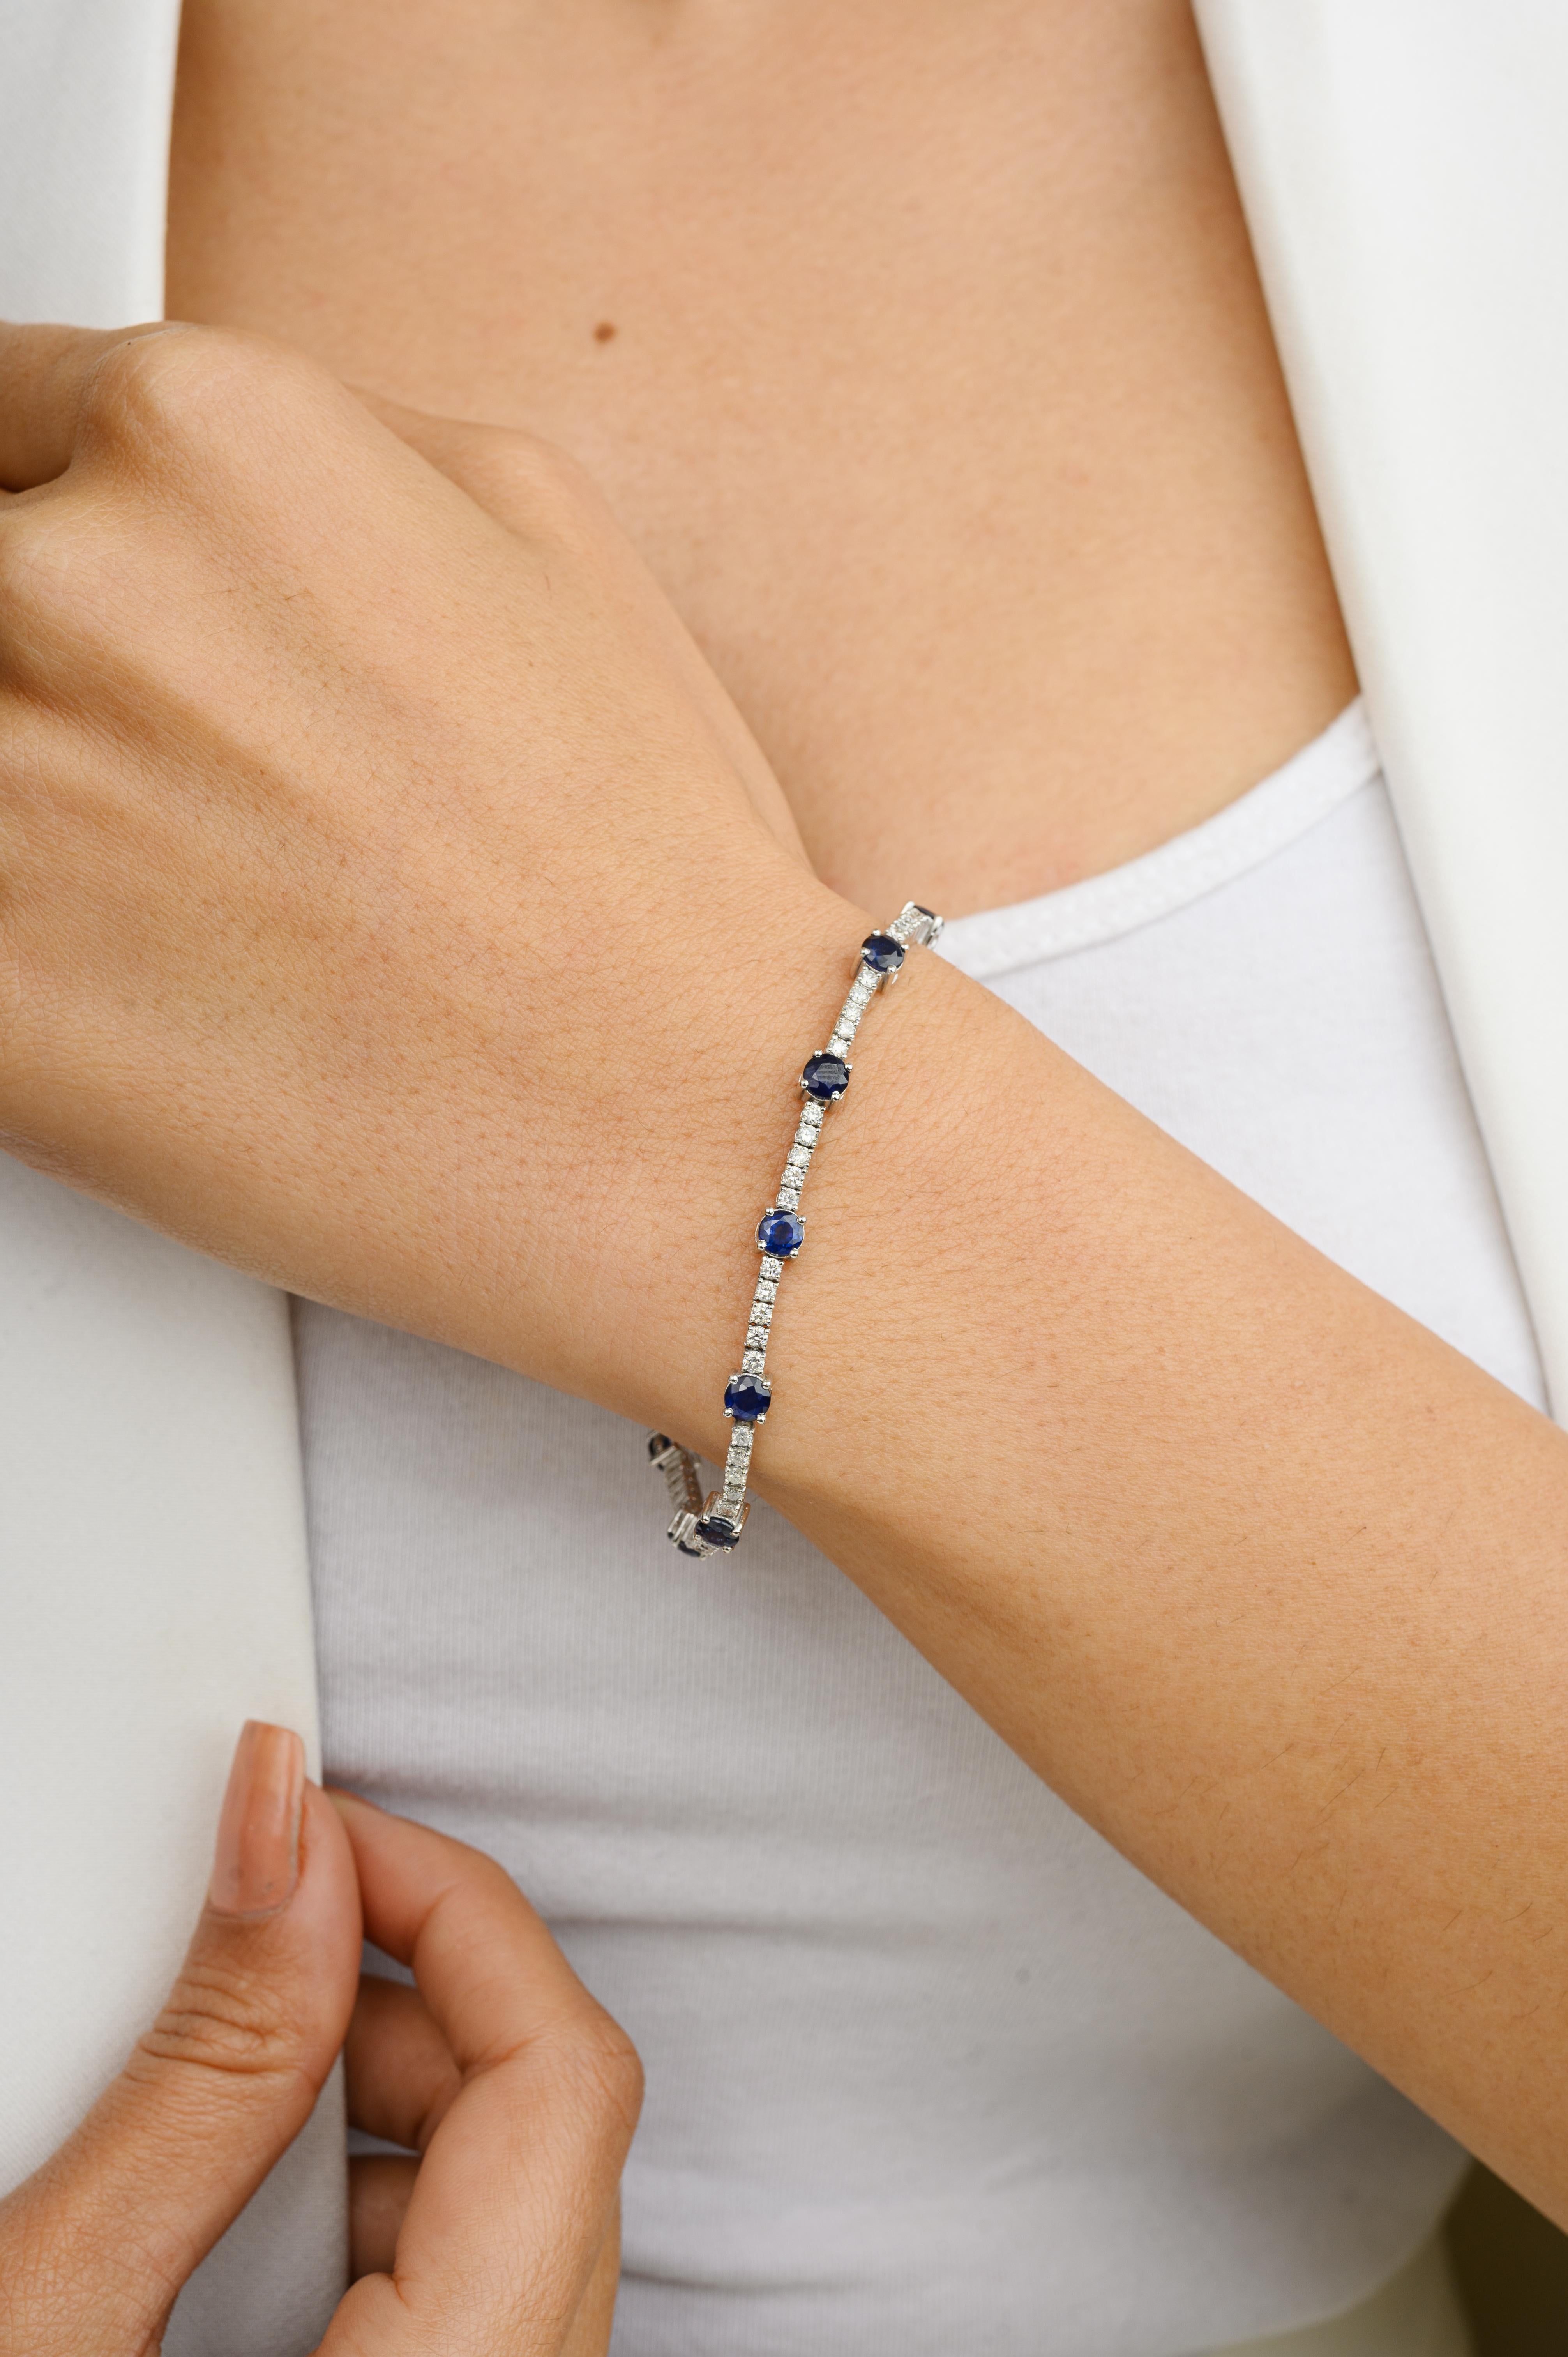 This Fine Diamond and Blue Sapphire Engagement Bracelet in 18K gold showcases endlessly sparkling natural blue sapphire of 3.57 carats and 1.41 carats diamonds. It measures 7 inches long in length. 
Sapphire stimulates concentration and reduces